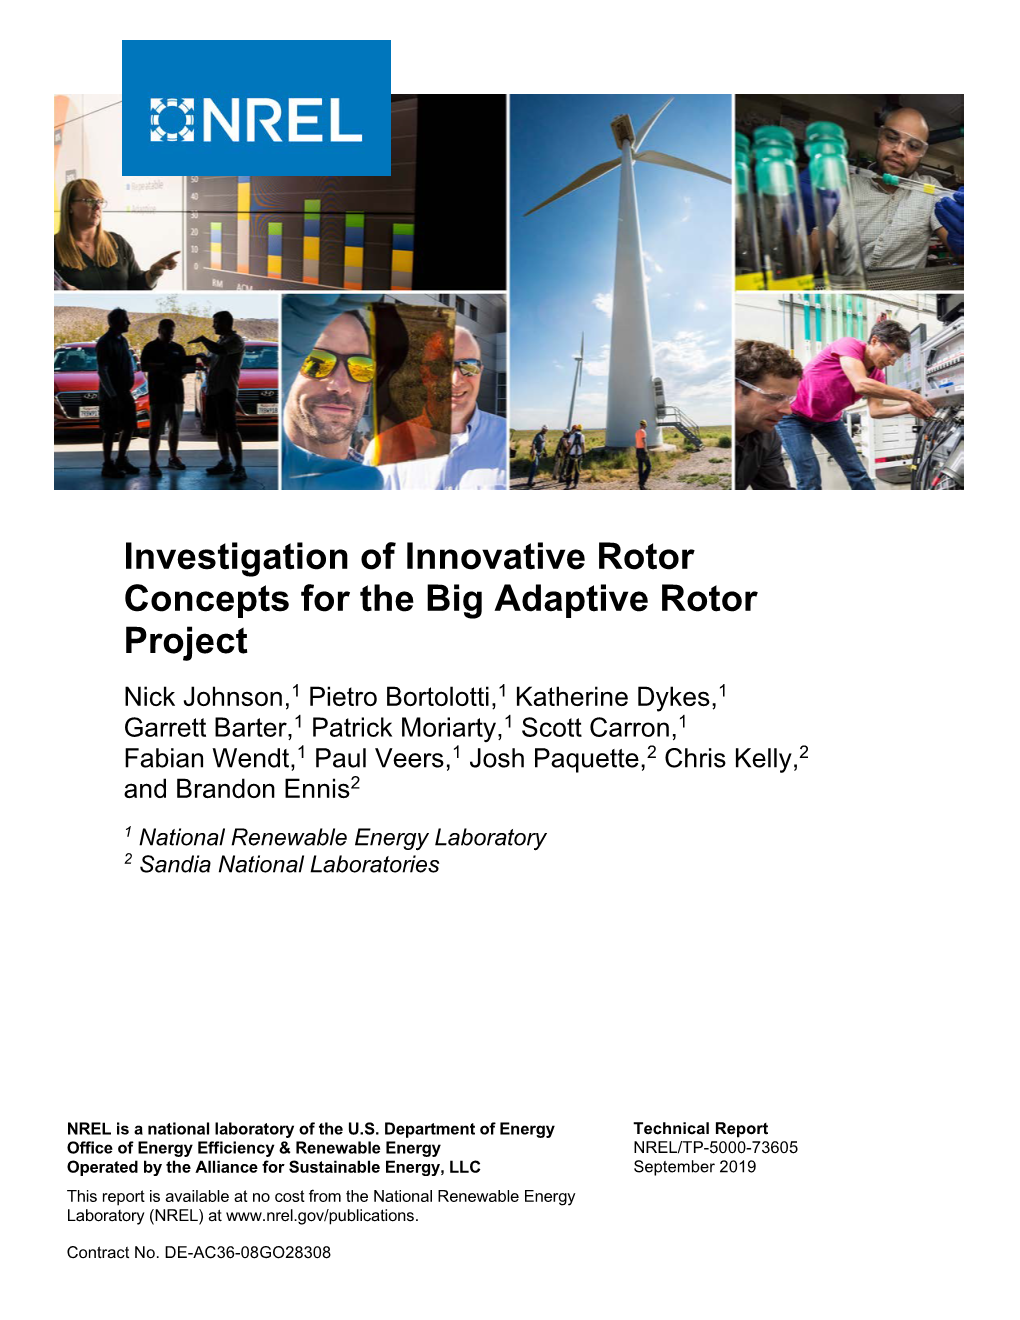 Investigation of Innovative Rotor Concepts for the Big Adaptive Rotor